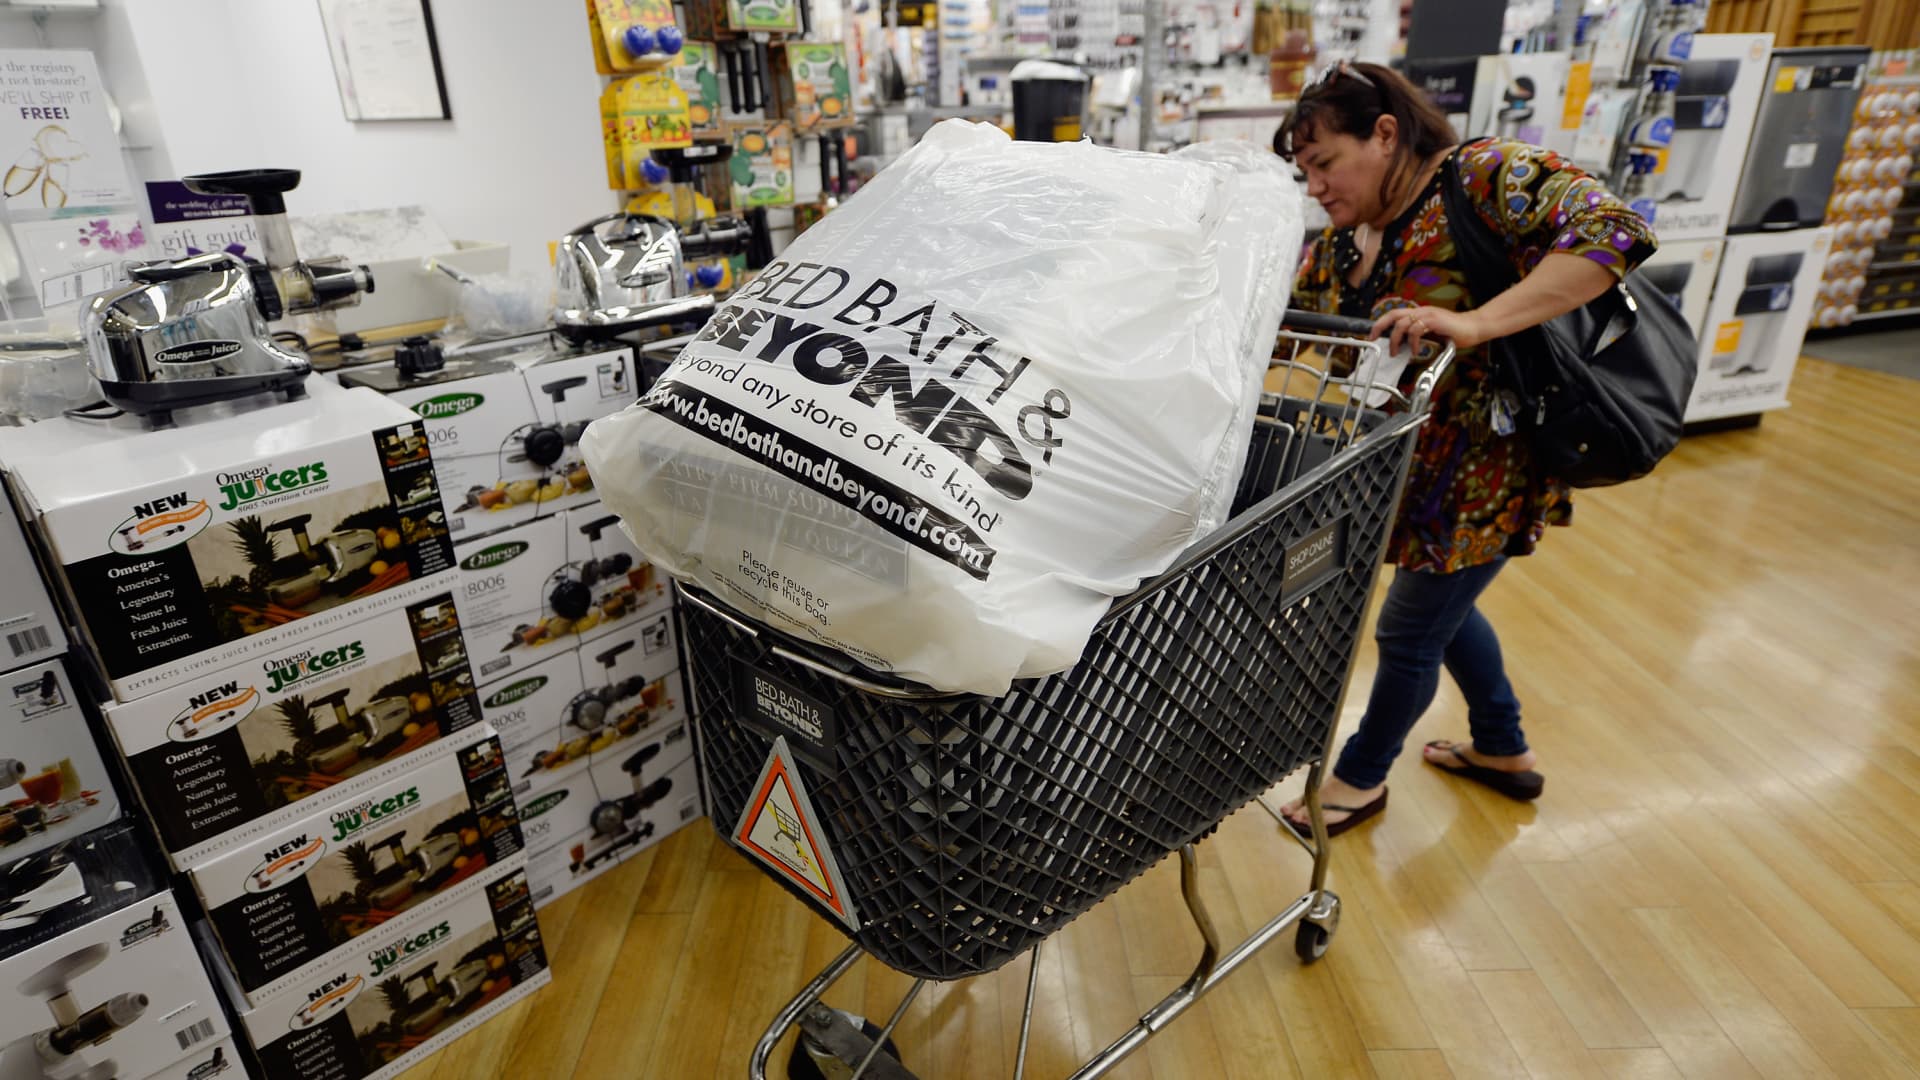 Customers carry bags from Bed Bath & Beyond store on April 10, 2013 in Los Angeles, California.